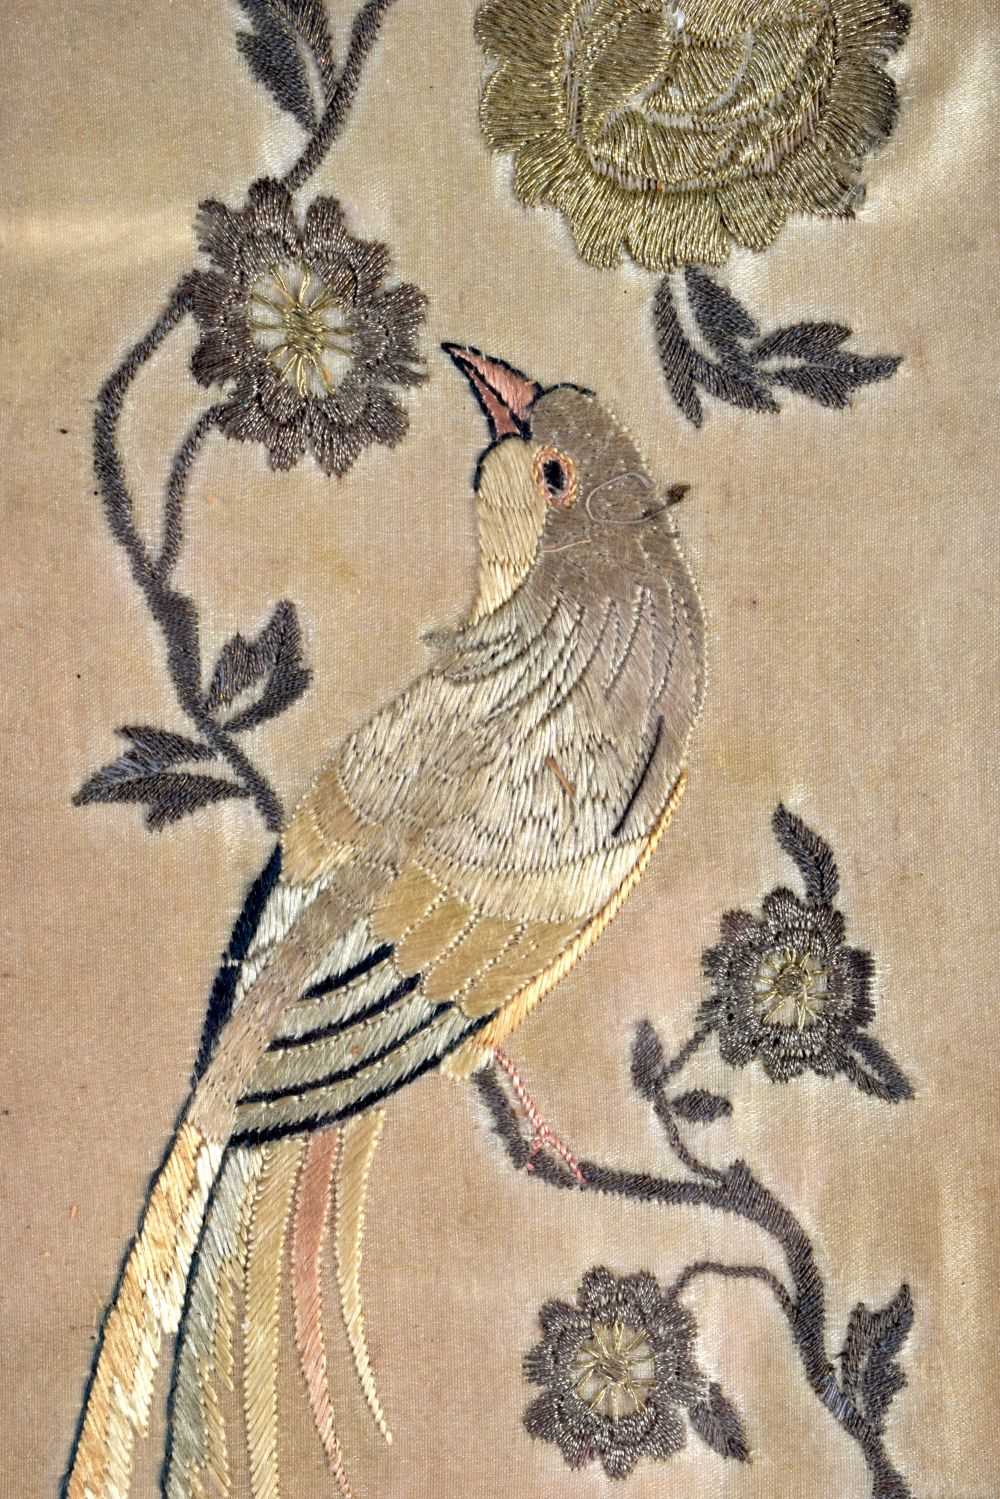 TWO 19TH CENTURY CHINESE SILK EMBROIDERED PANELS depicting birds and figures. Largest 50 cm x 10 cm. - Image 4 of 6